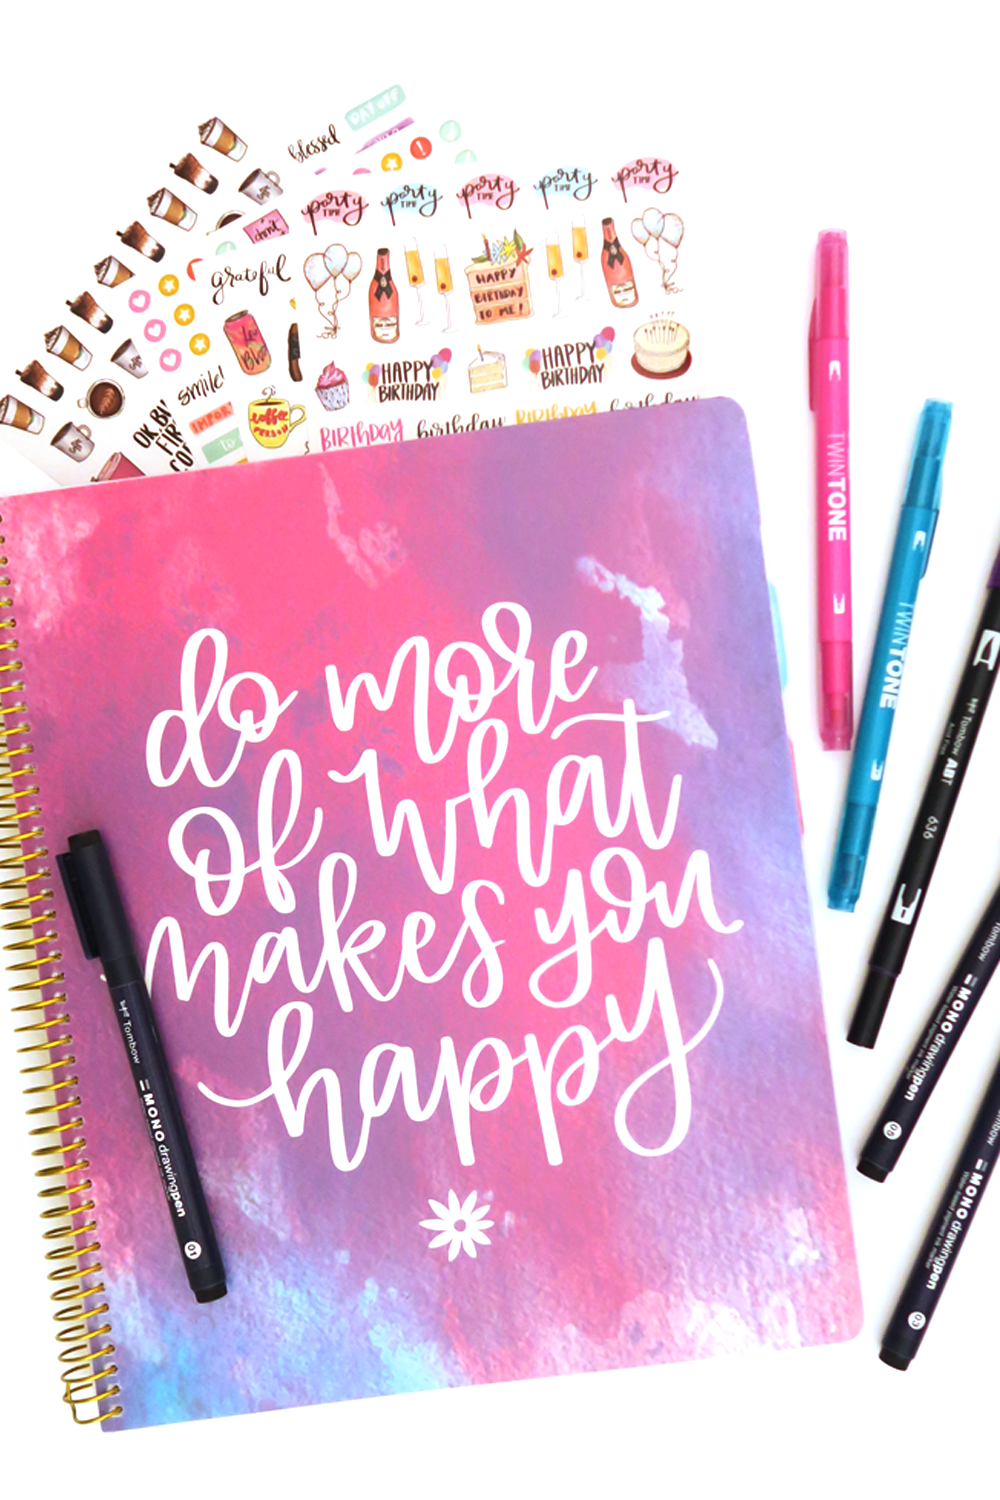 word-of-the-year-spread-with-bloom-daily-planners-tombow-usa-blog